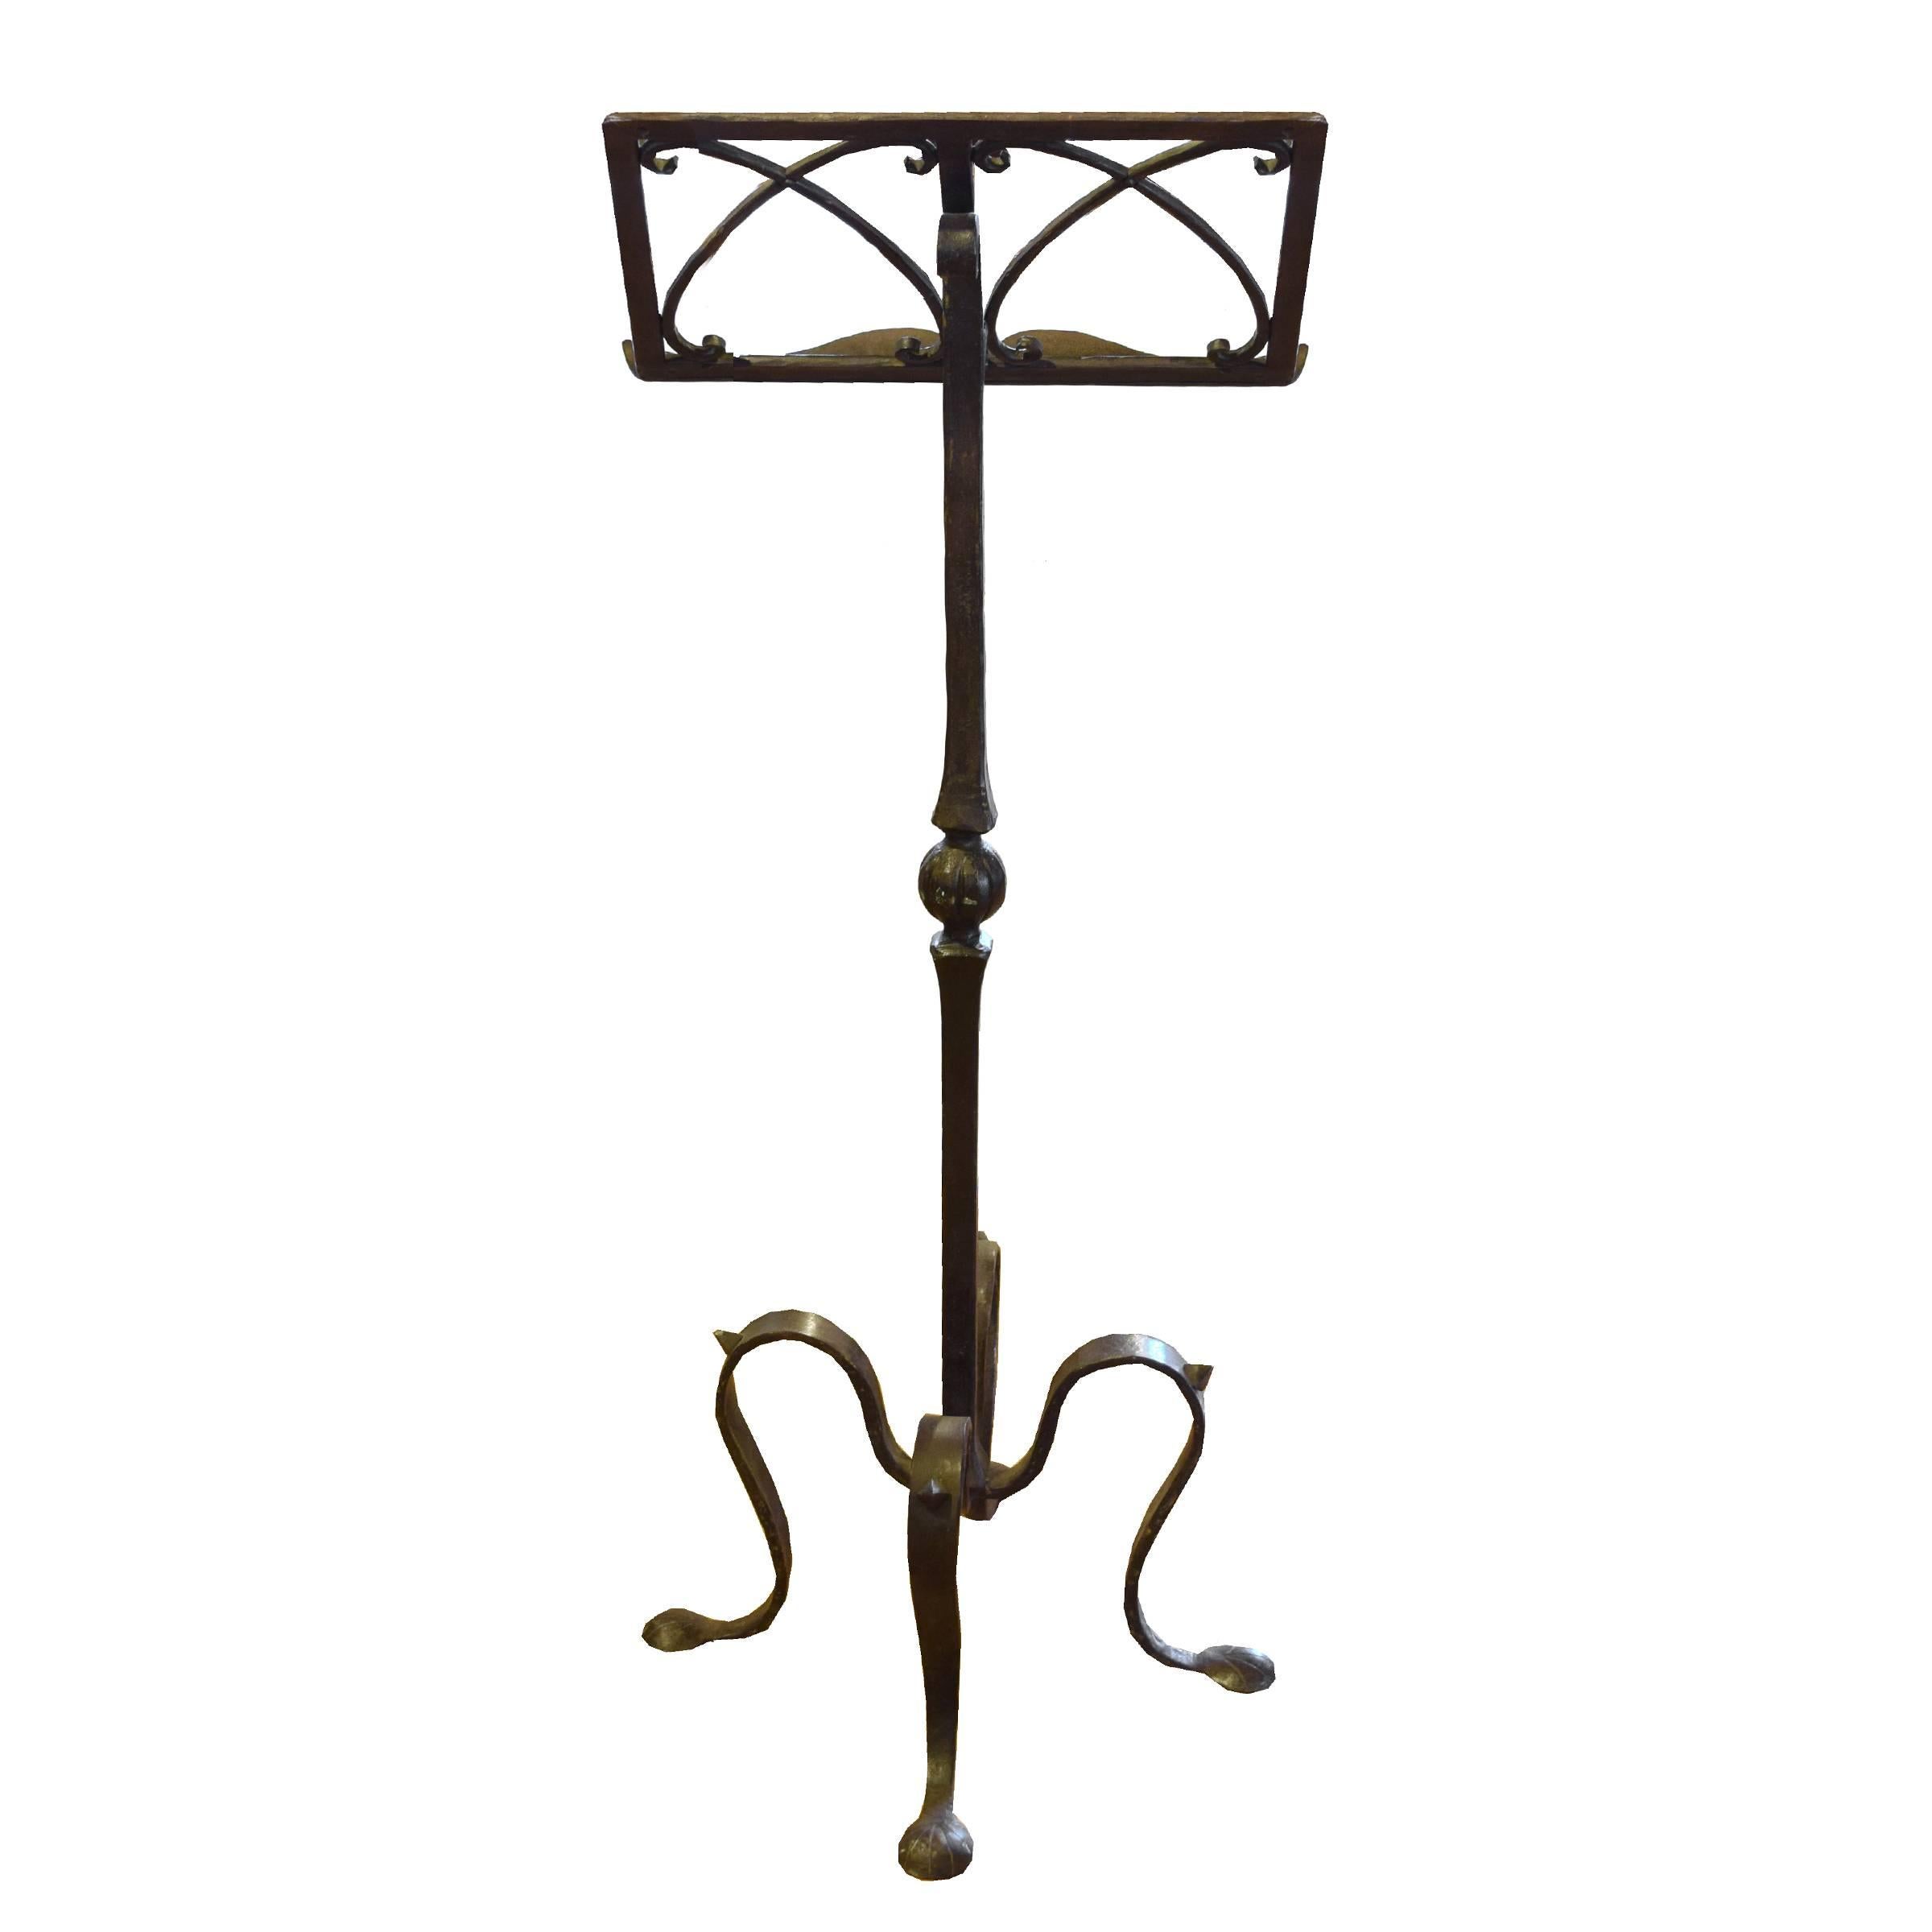 Italian Art Nouveau-esque wrought iron music or book stand with four curved legs ending in round feet, late 19th century.